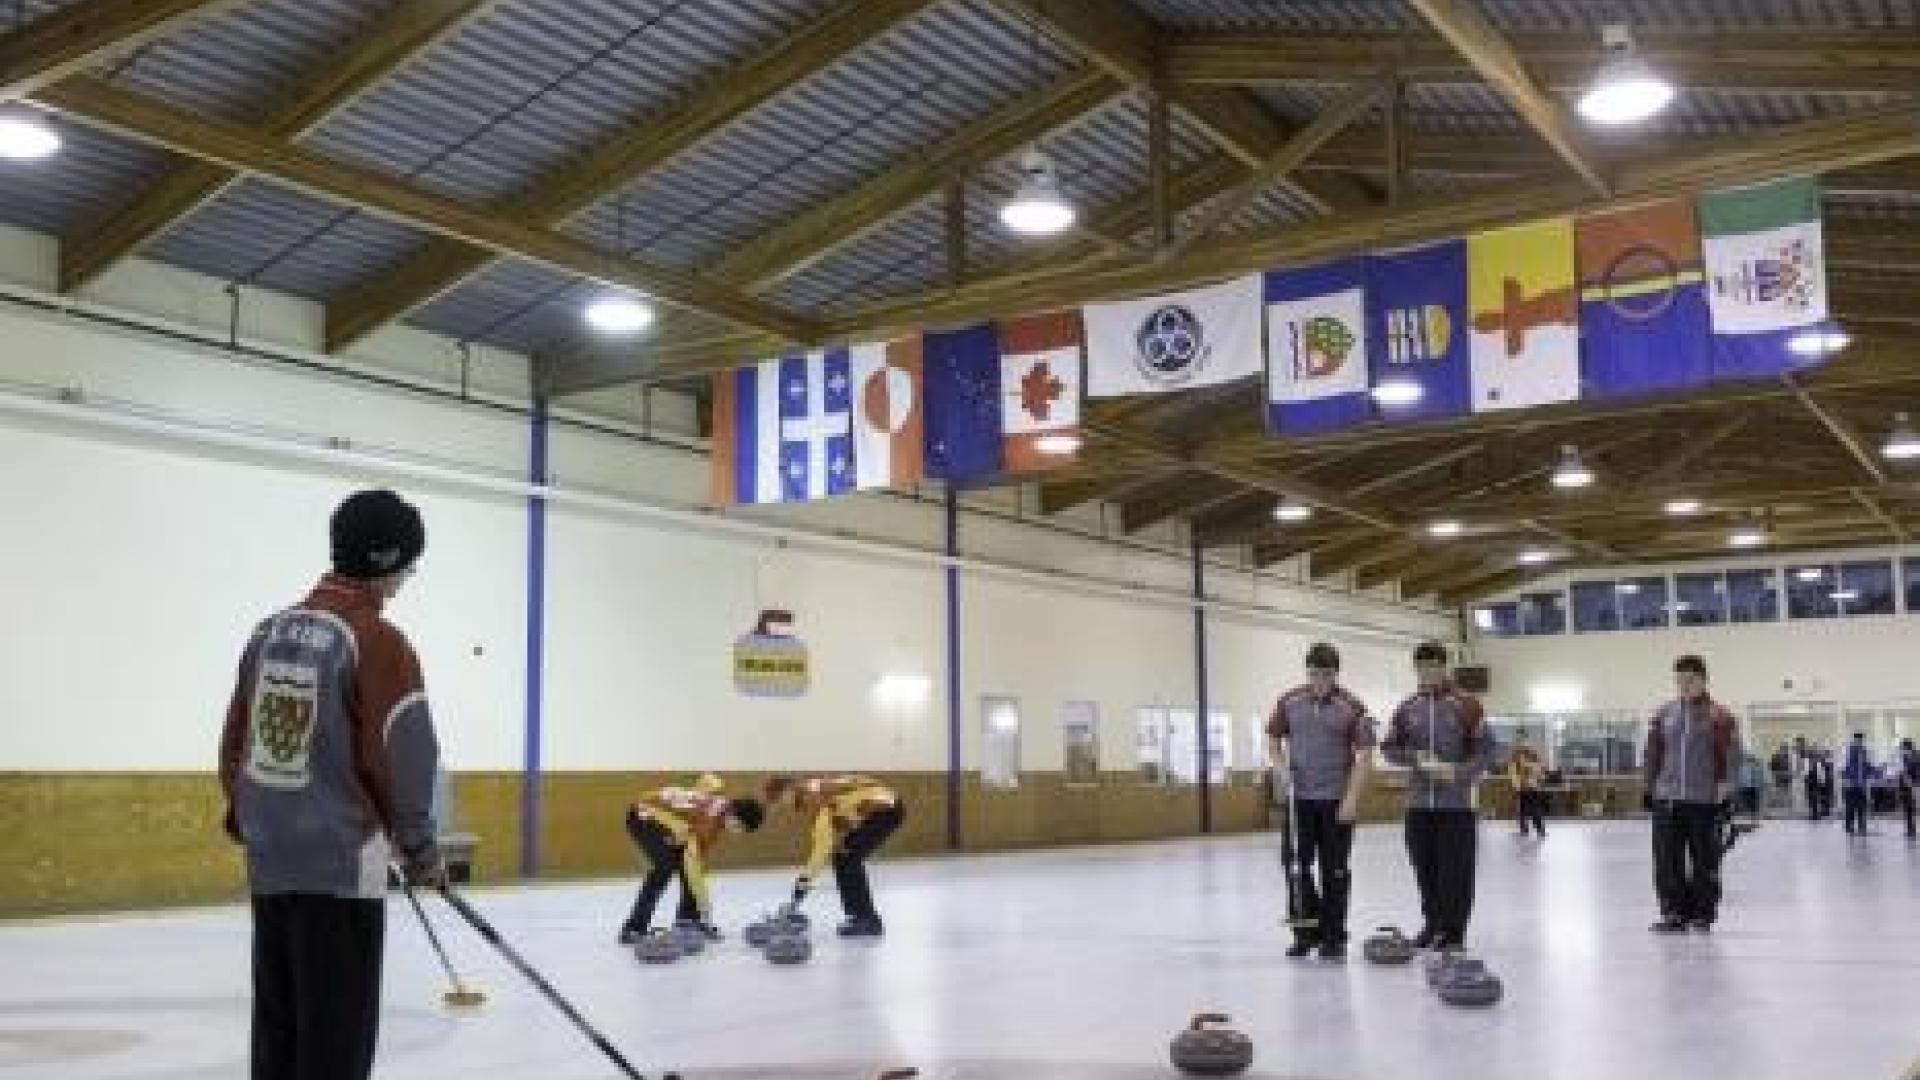 Curling teams playing curling at arena.